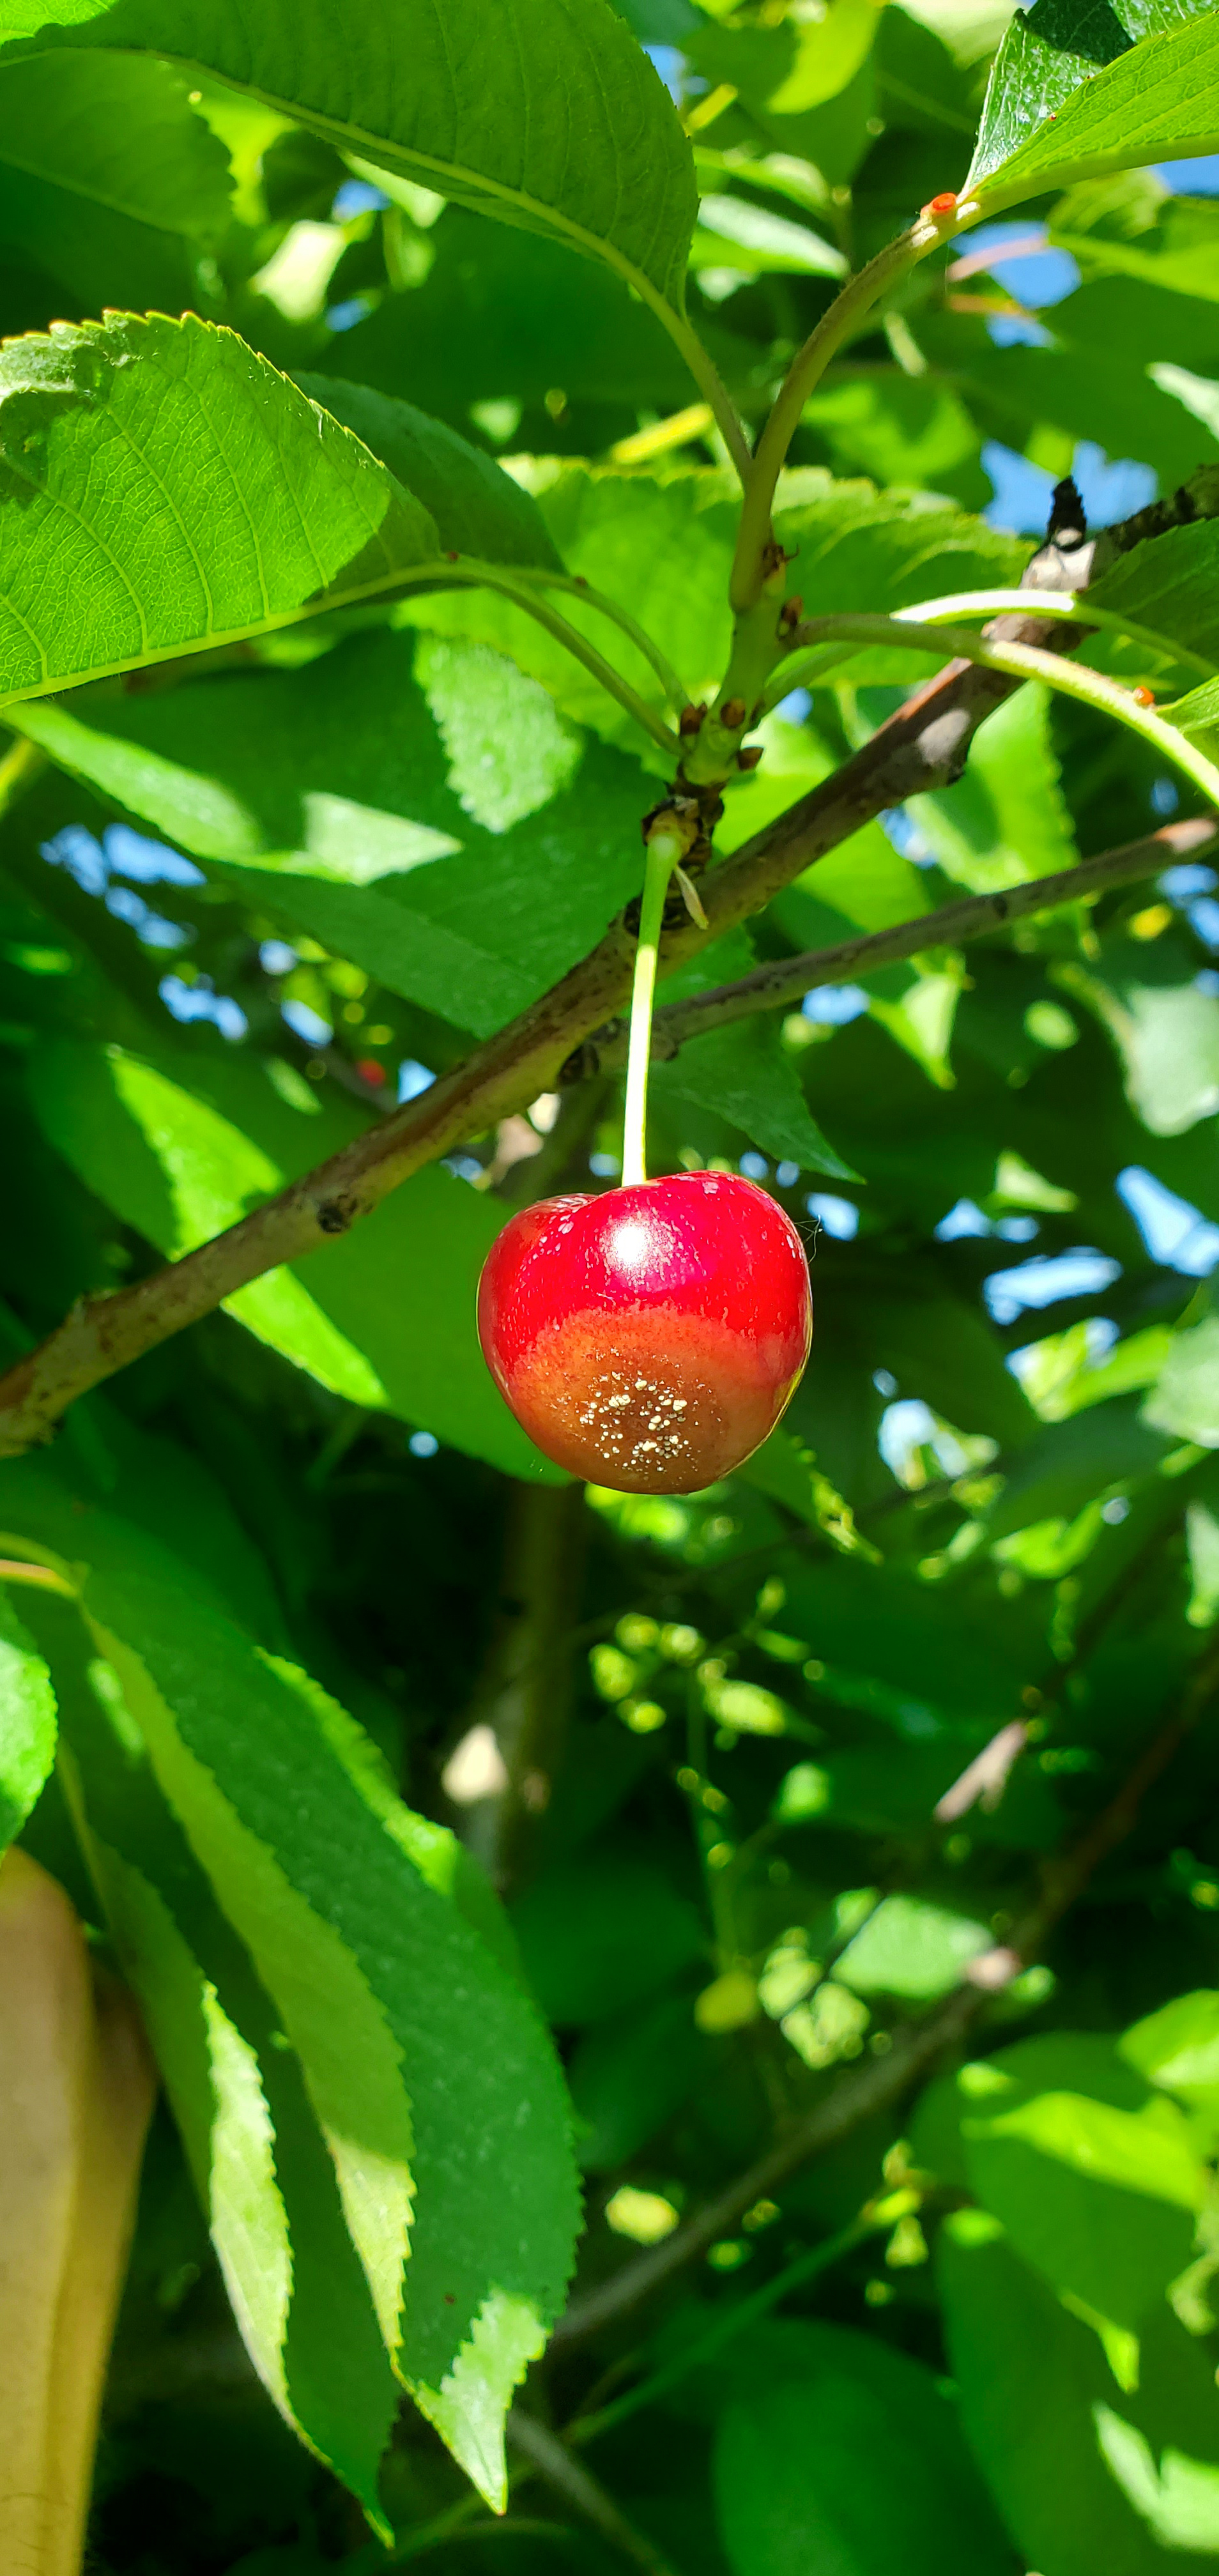 Brown rot on cherry.